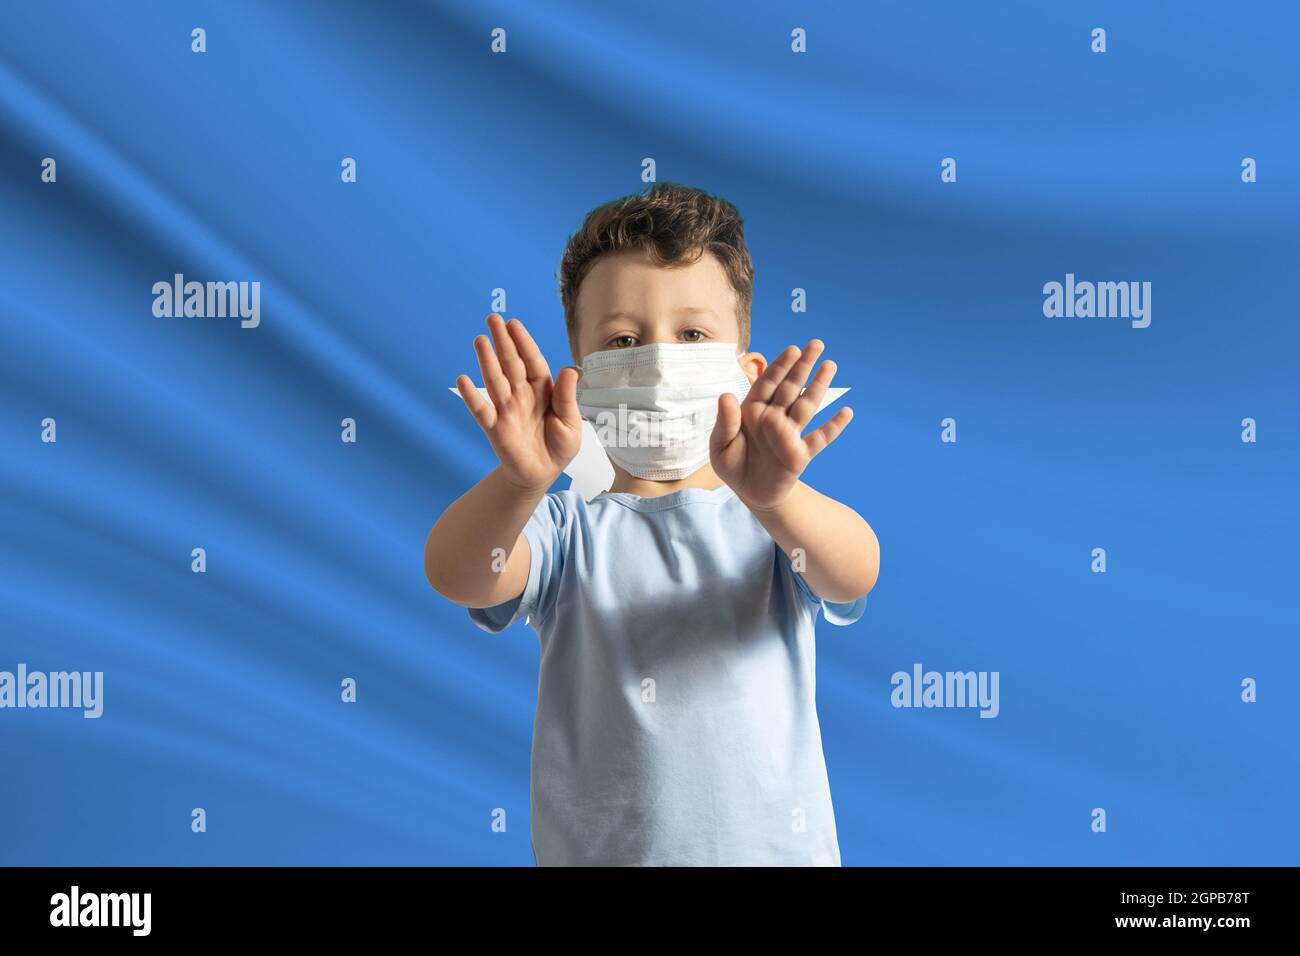 Little white boy in a protective mask on the background of the flag of Somalia. Makes a stop sign with his hands, stay at home Somalia. Stock Photo